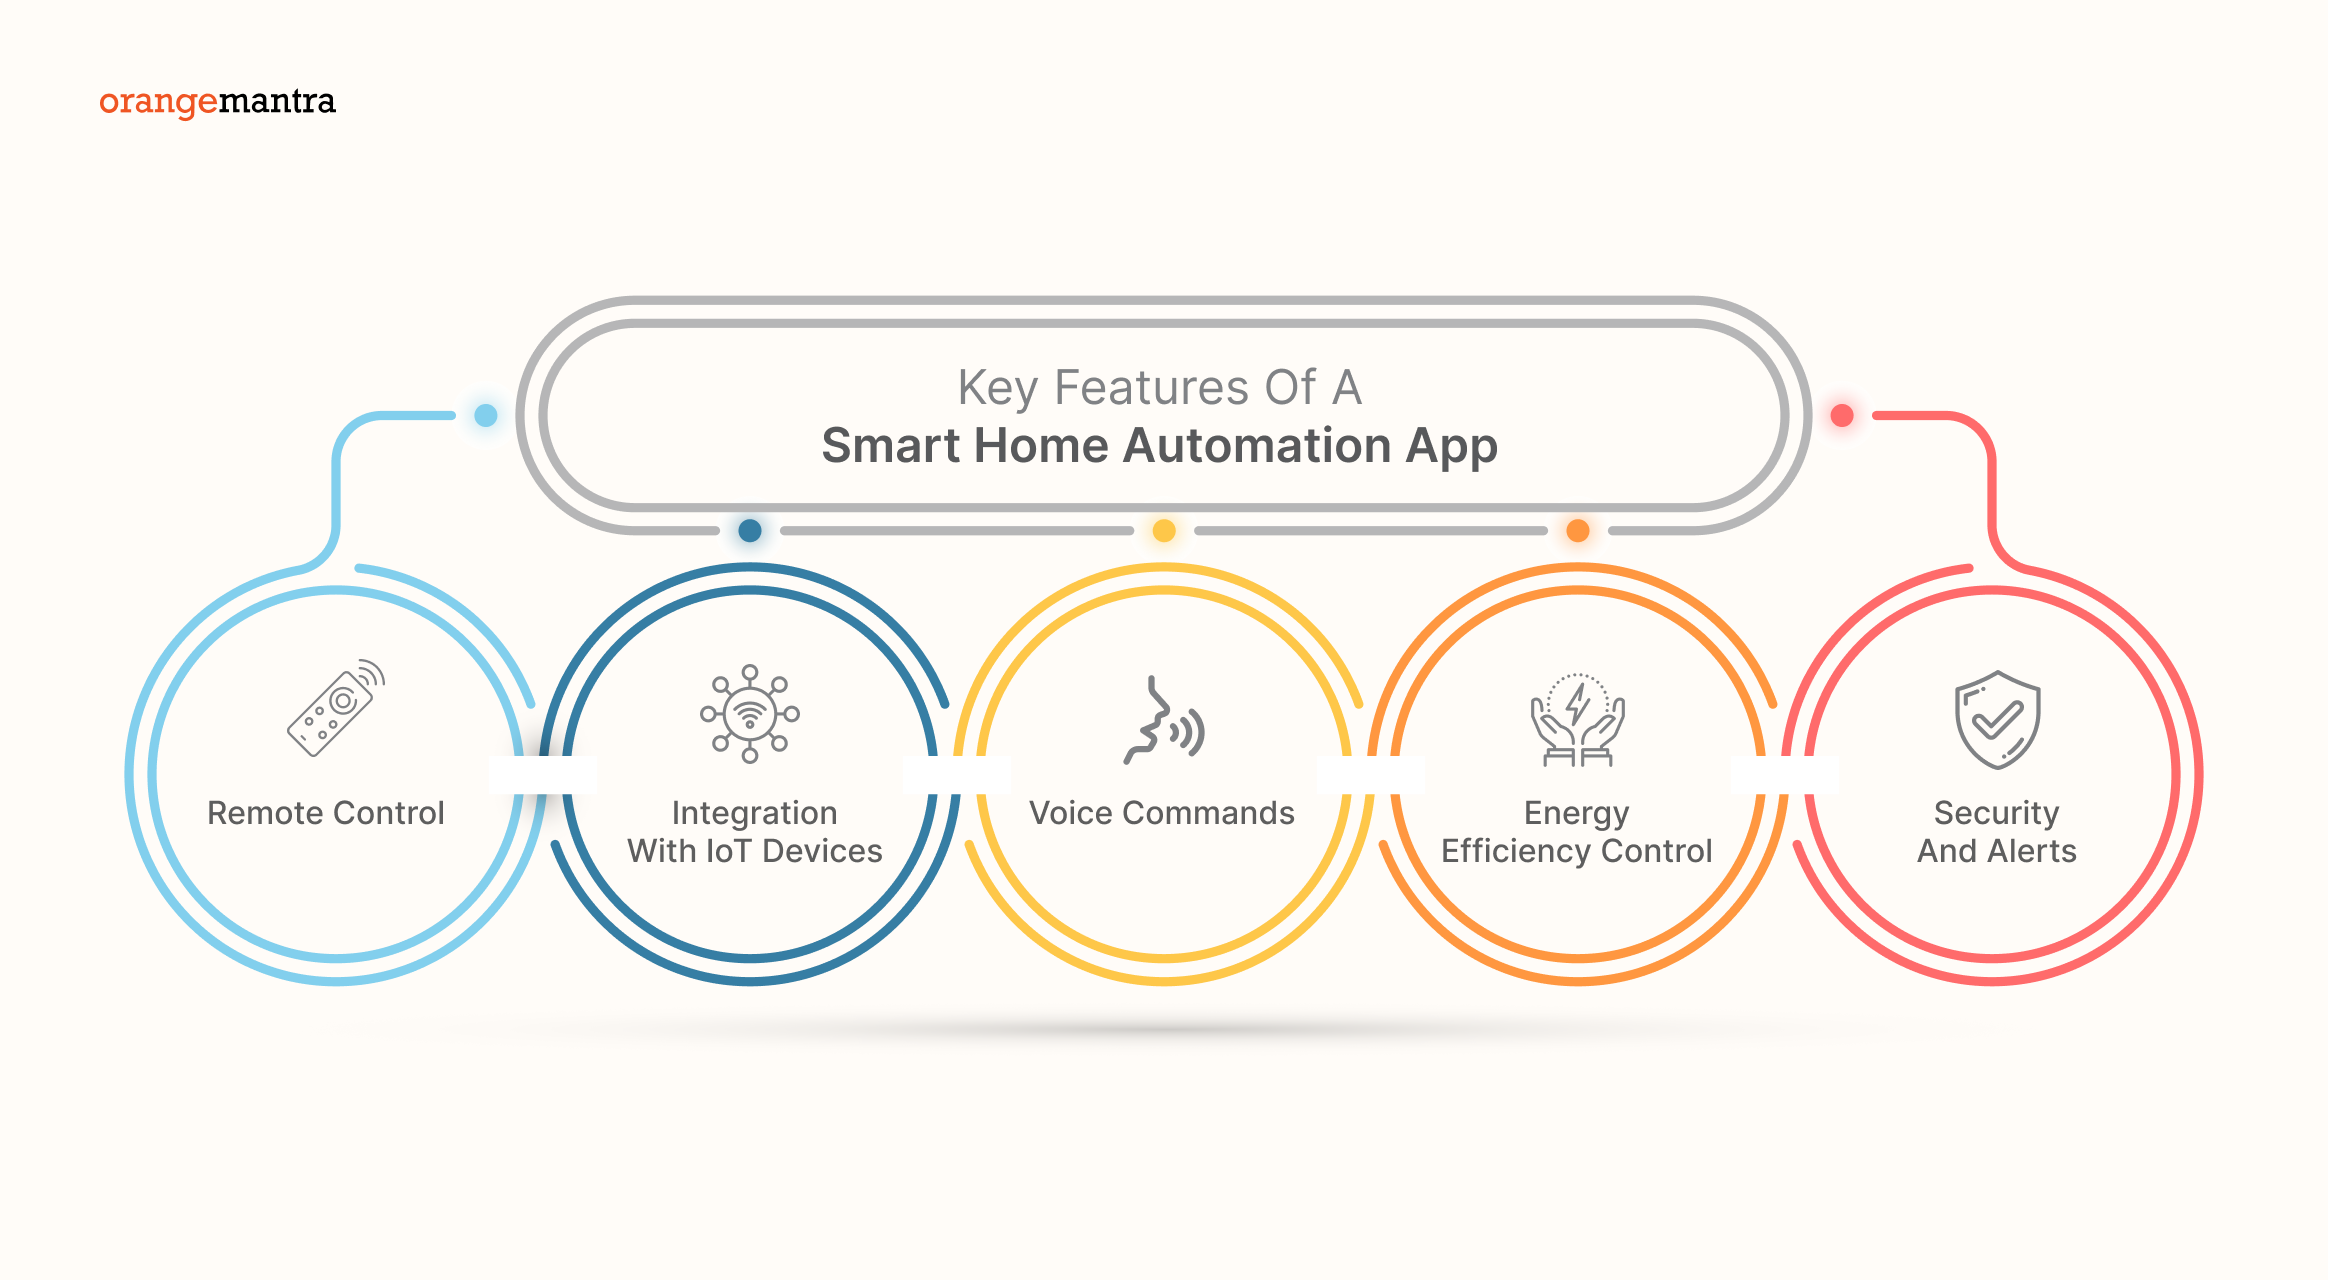 Key Features of a Smart Home Automation